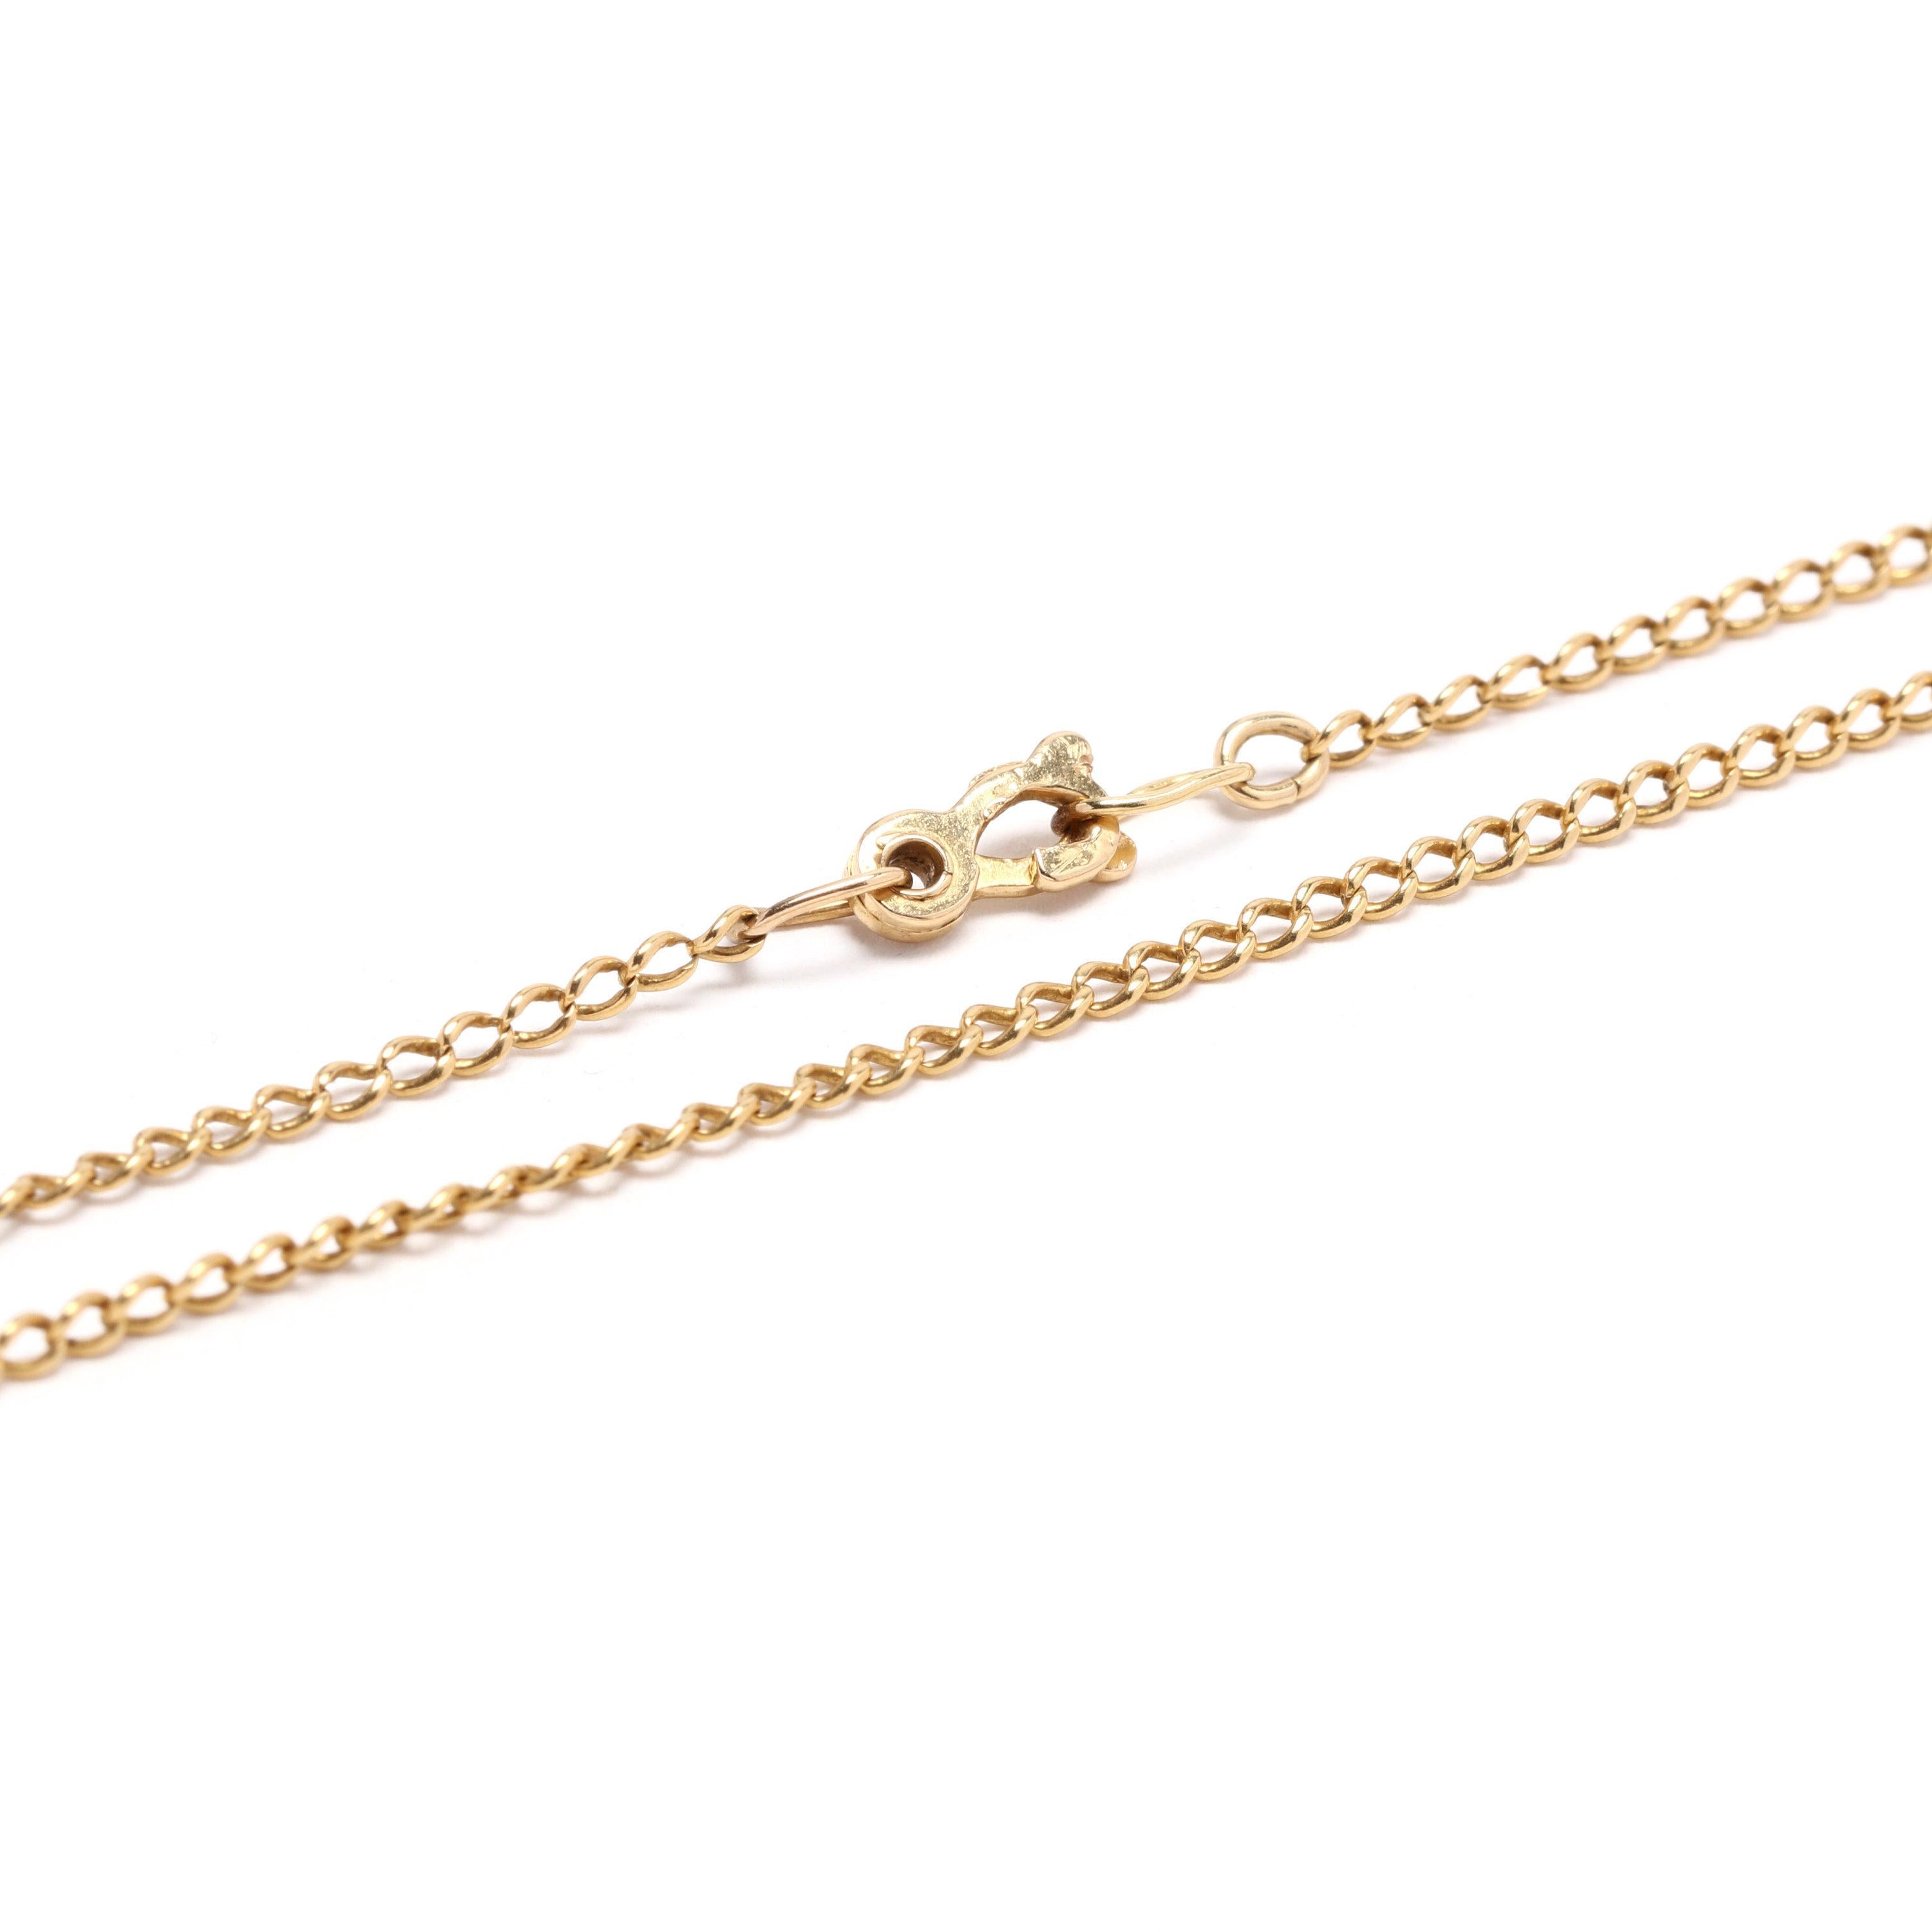 18k yellow gold thin curb chain. A delicate chain that could be worn on its own or with a pendant.

Length: 26 in.

Width: 1.5 mm

2.5 dwts.
